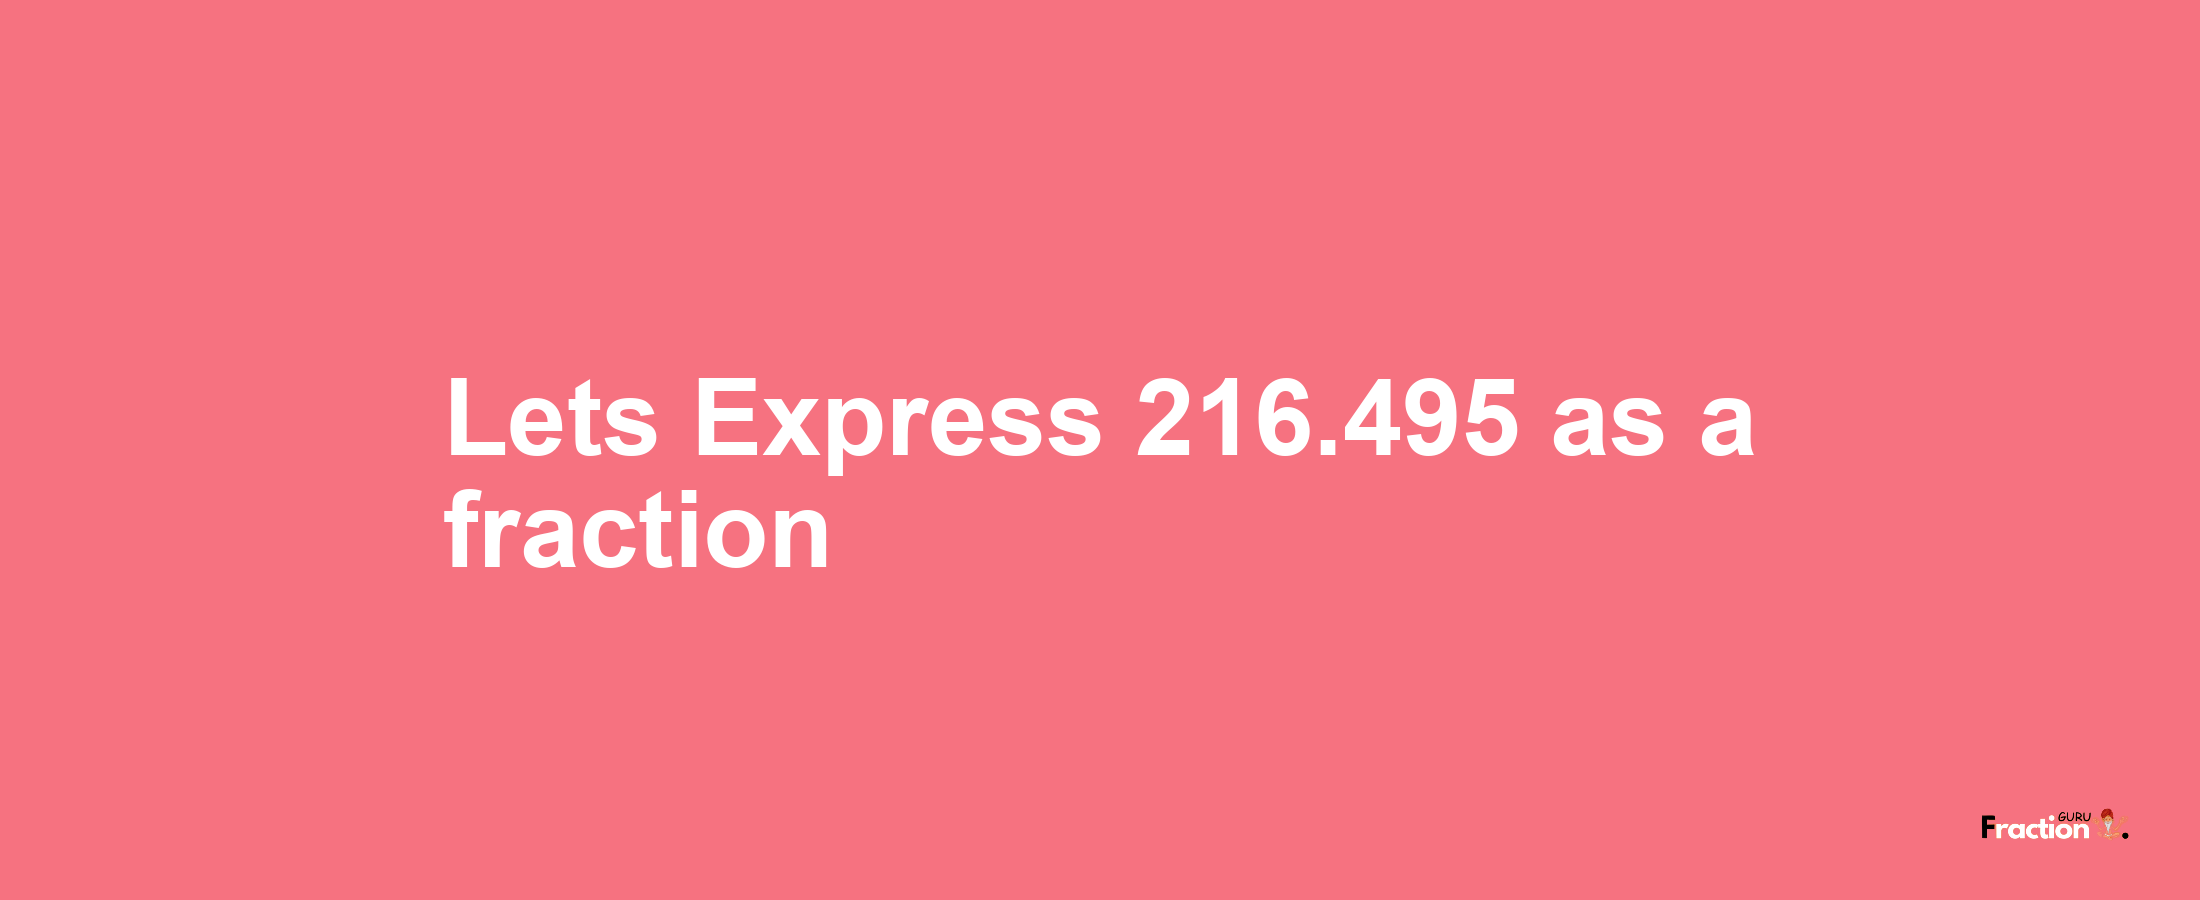 Lets Express 216.495 as afraction